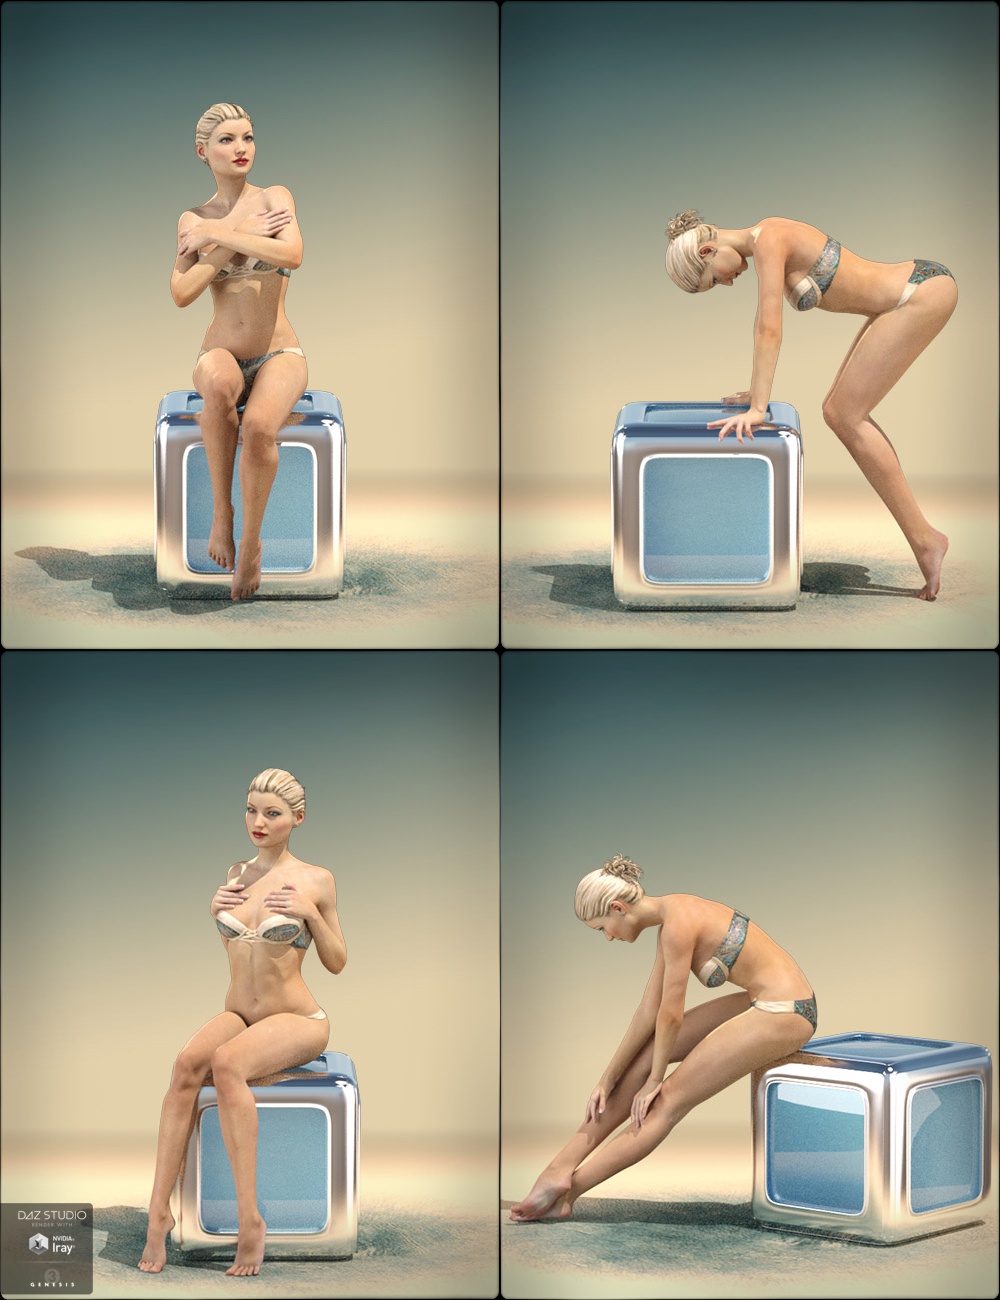 Precious Model Poses for Eva 7 - On The Box by: 3D-GHDesignvikike176, 3D Models by Daz 3D